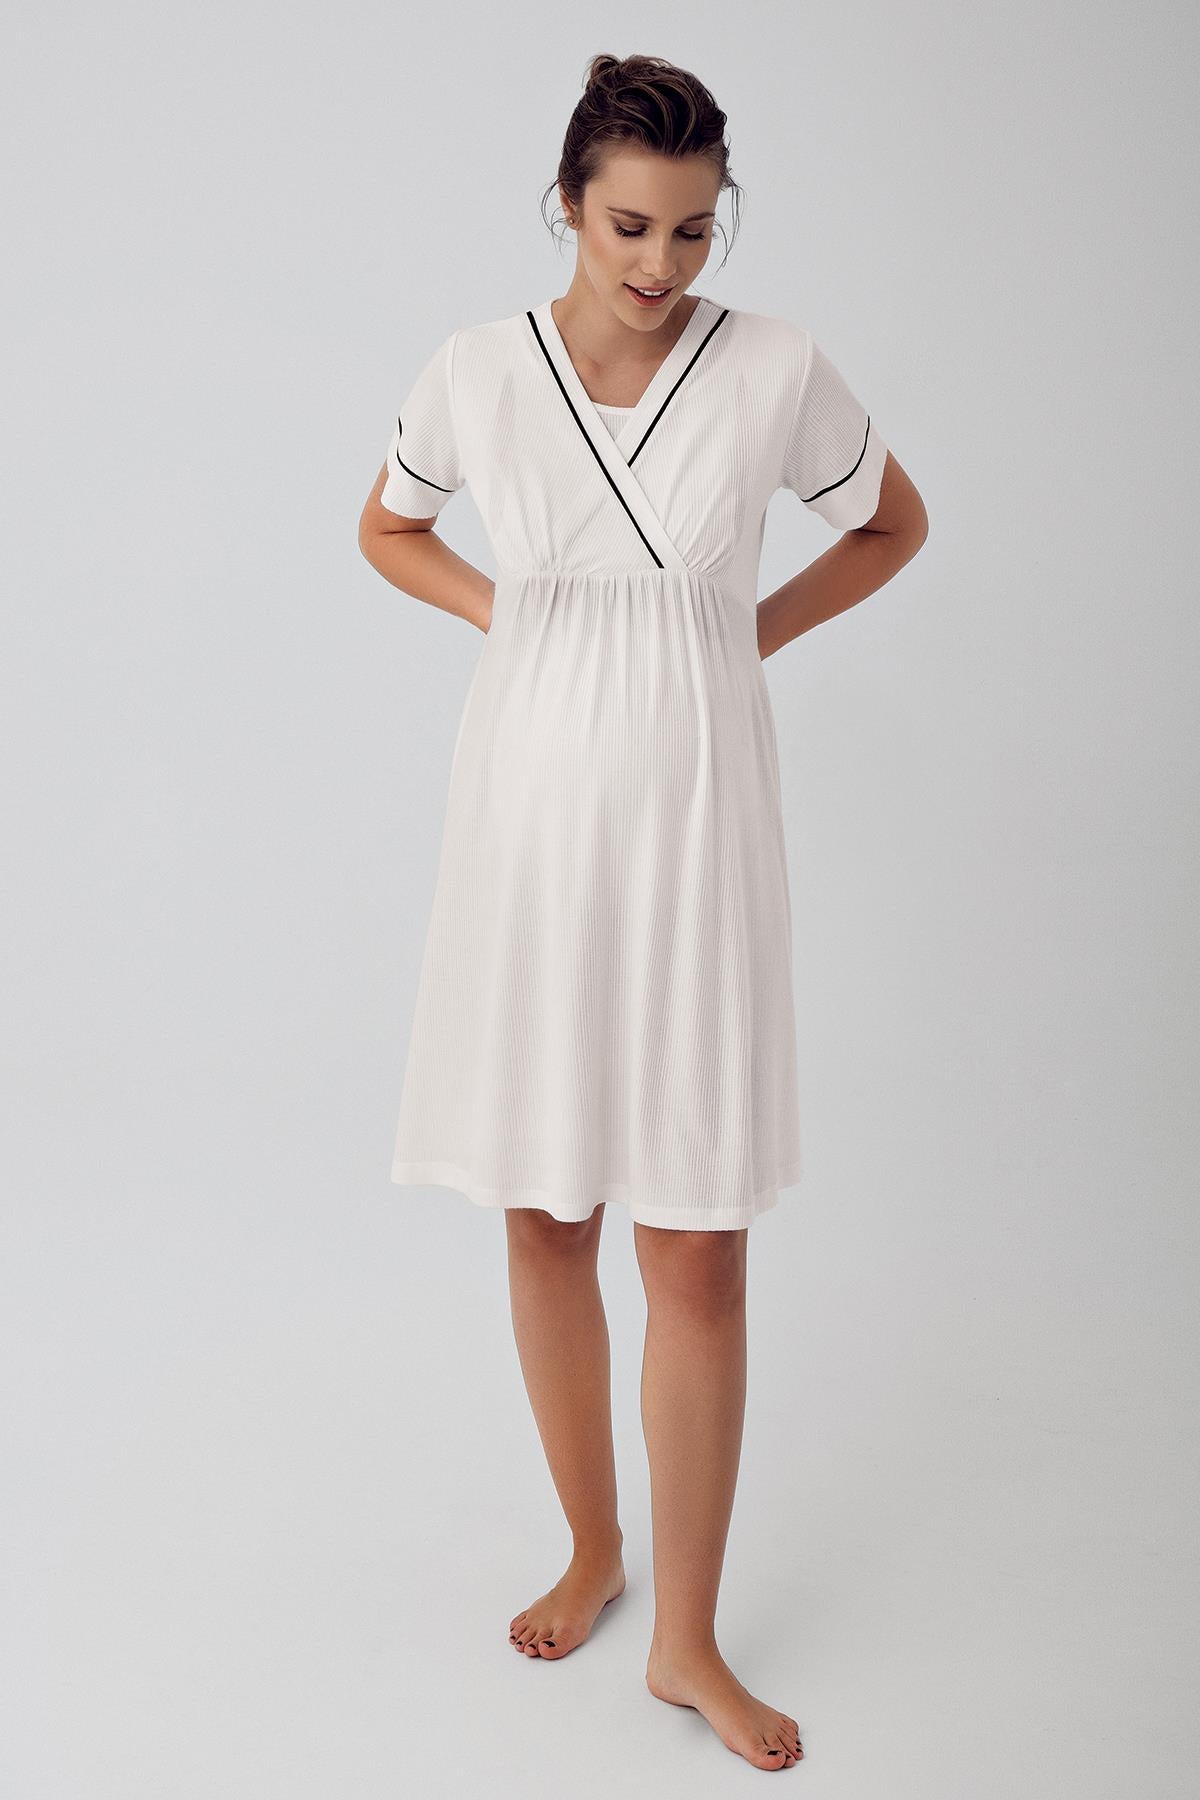 Short Sleeve Flexible Viscose Maternity Dressing Gown Nightgown Set 16402